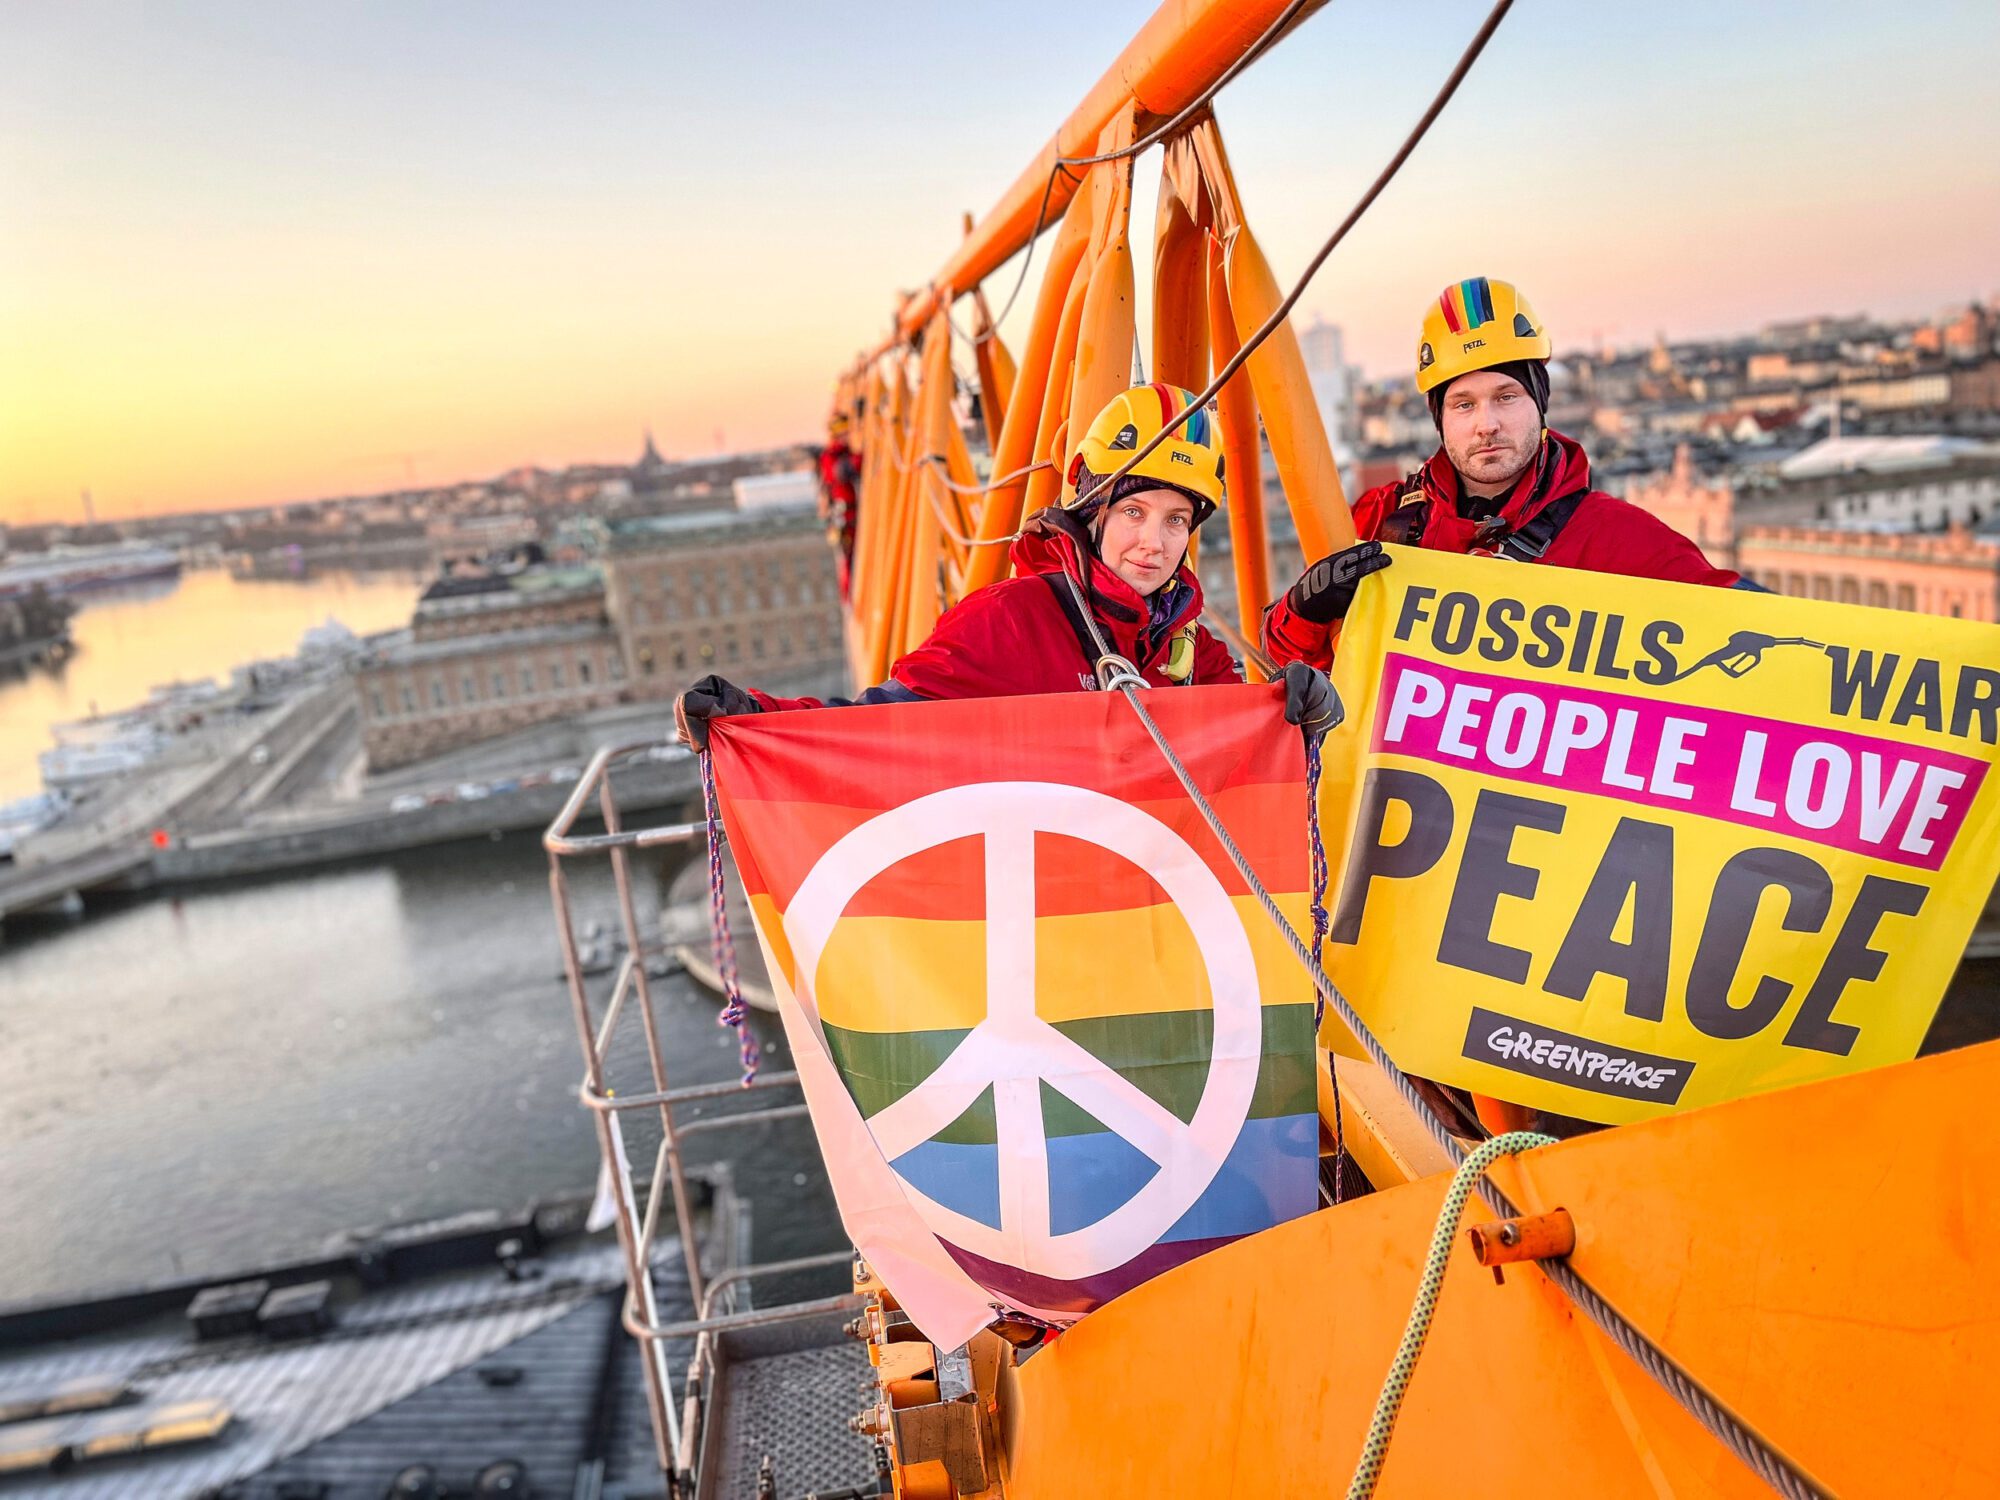 Two Greenpeace activists above a city flying a peace sign and “Fossils = war. People love peace” banners